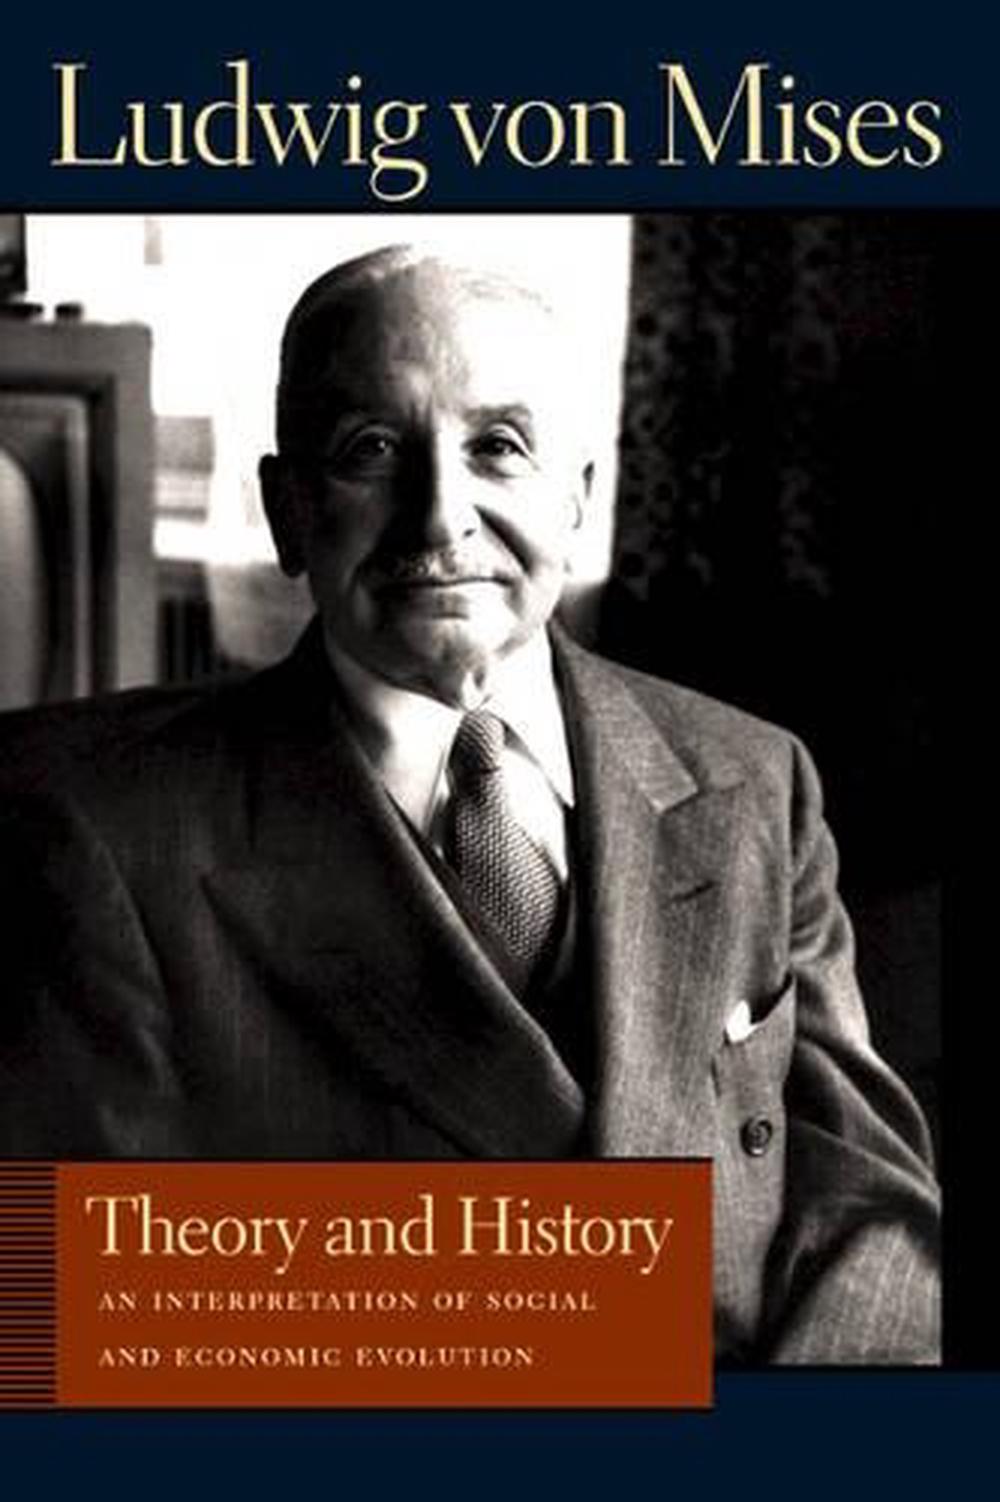 Theory and History by Ludwig Von Mises (English) Paperback Book Free ...